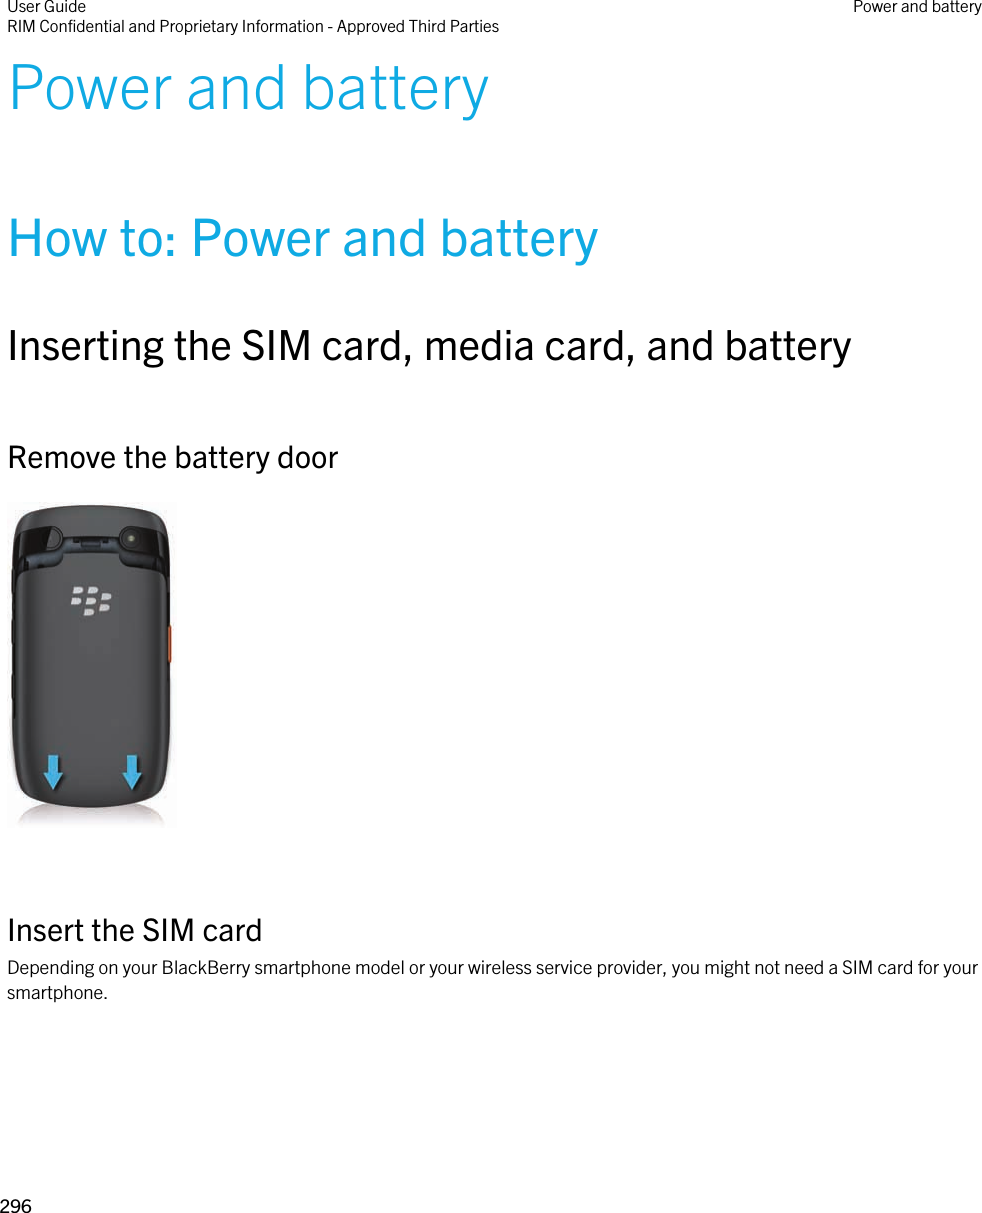 Power and batteryHow to: Power and batteryInserting the SIM card, media card, and batteryRemove the battery door  Insert the SIM cardDepending on your BlackBerry smartphone model or your wireless service provider, you might not need a SIM card for your smartphone. User GuideRIM Confidential and Proprietary Information - Approved Third Parties Power and battery296 